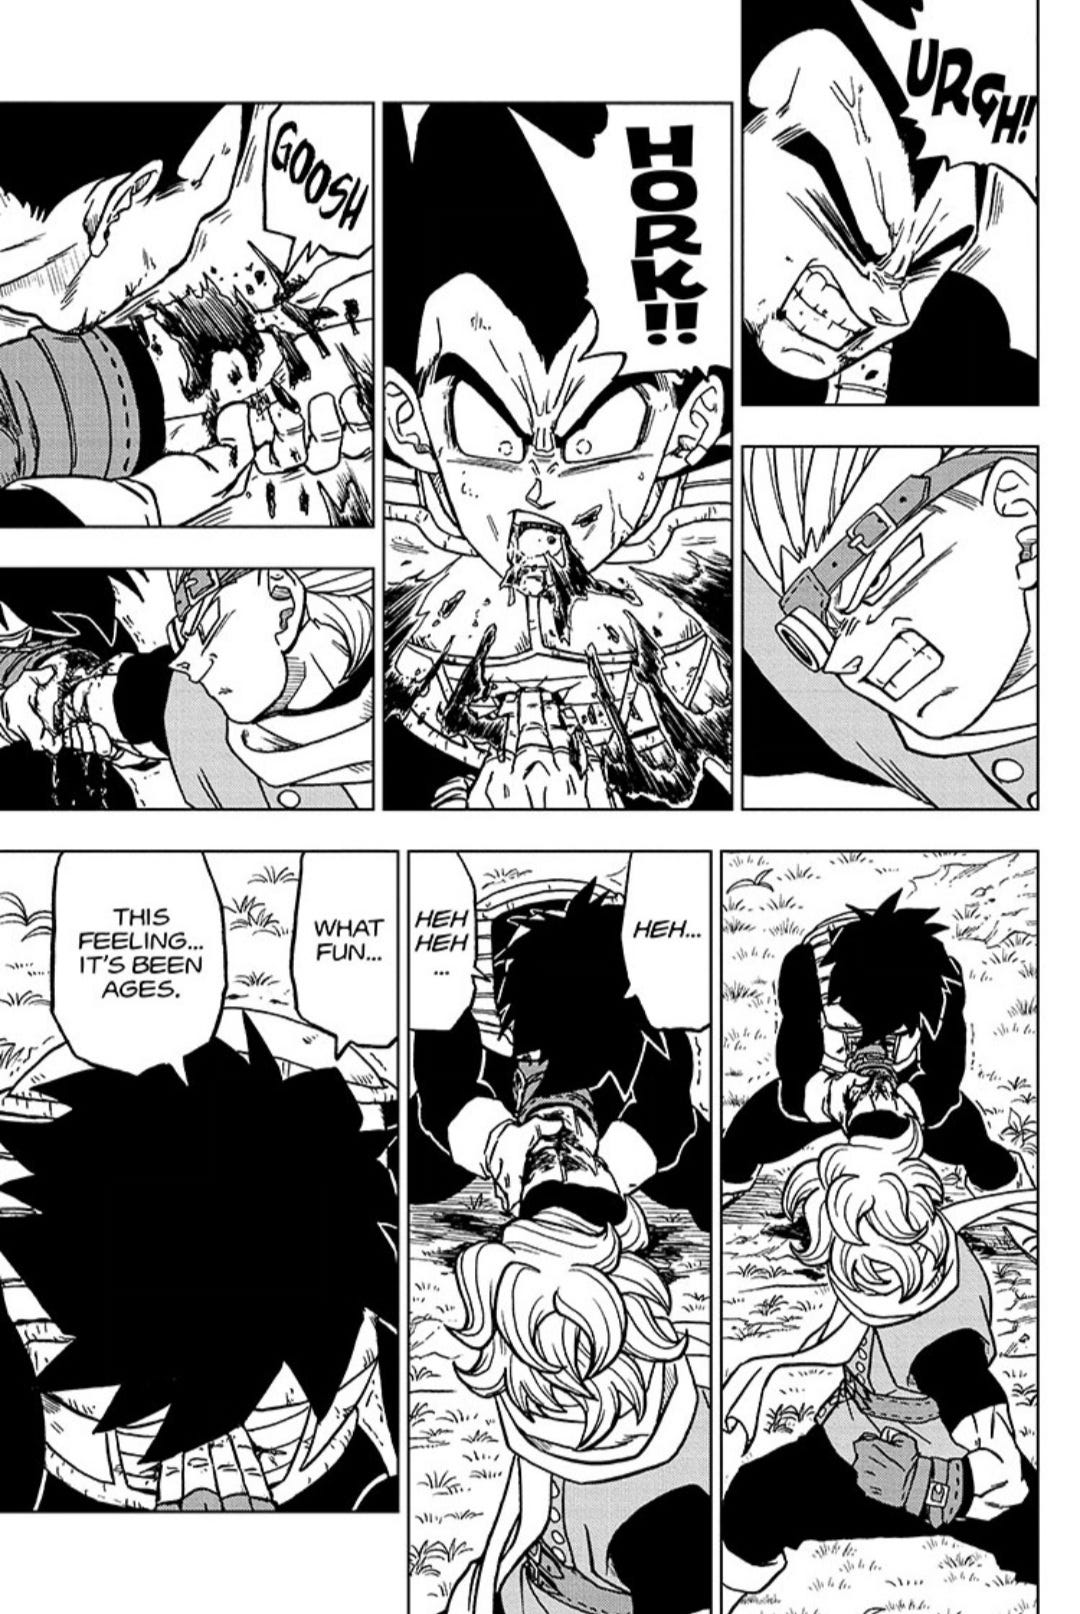 Why did Toyotaro utterly humiliate Vegeta in the Moro arc after hyping him  up the entire time? He didn't even give him one full chapter of glory after  training. Did he do